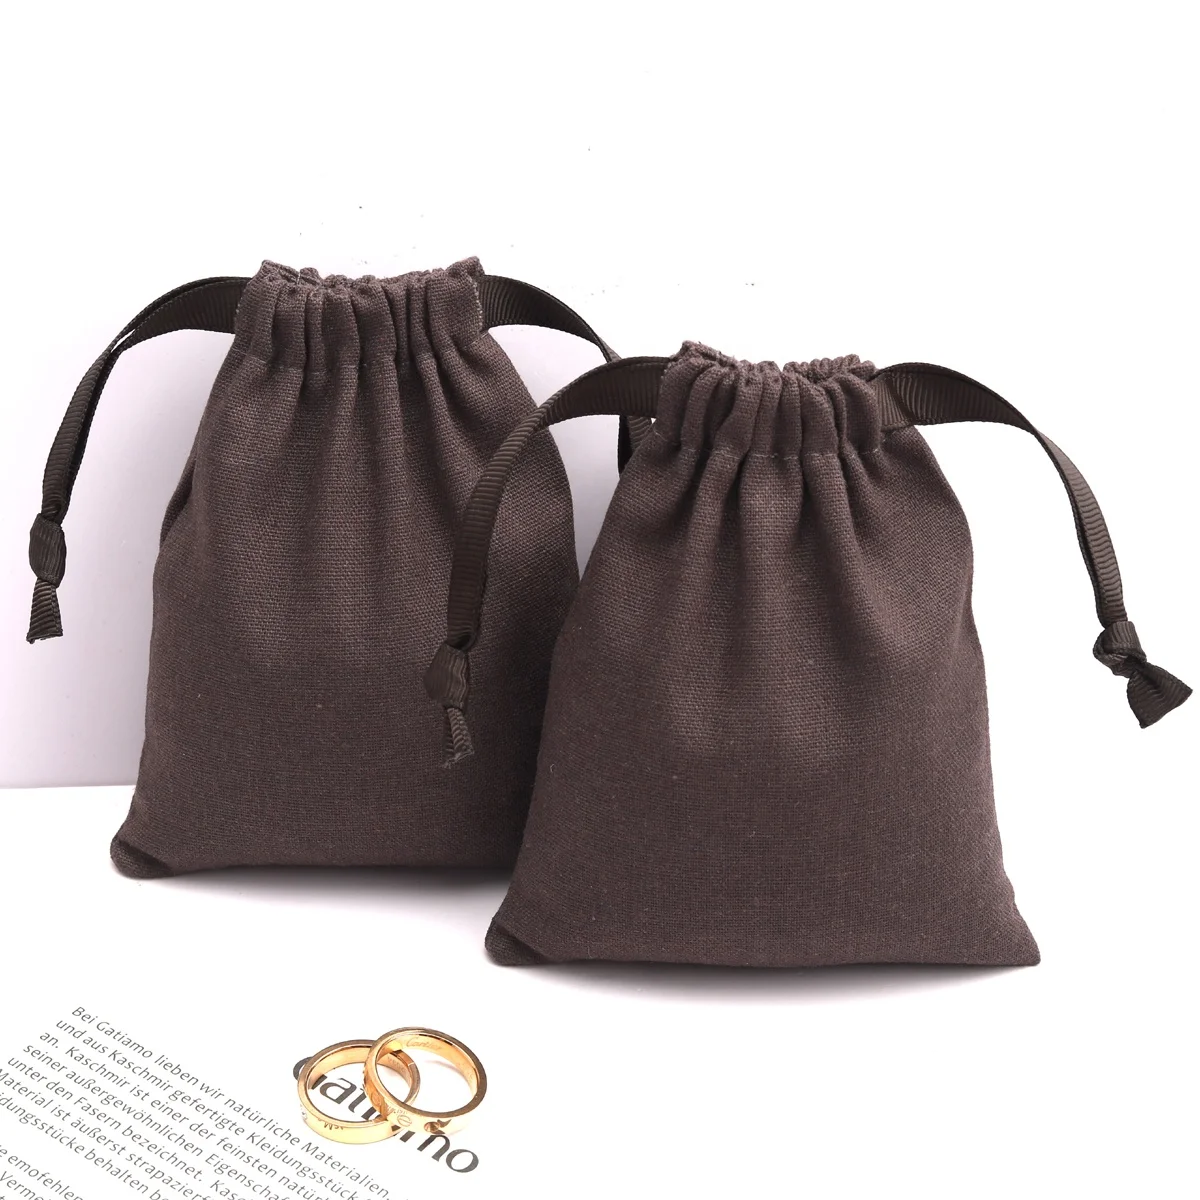 Custom Lgo Printed Brown Cotton Linen Candle Cup Packing Drawstring Bag Reusable Linen Gift Pouch For Candle